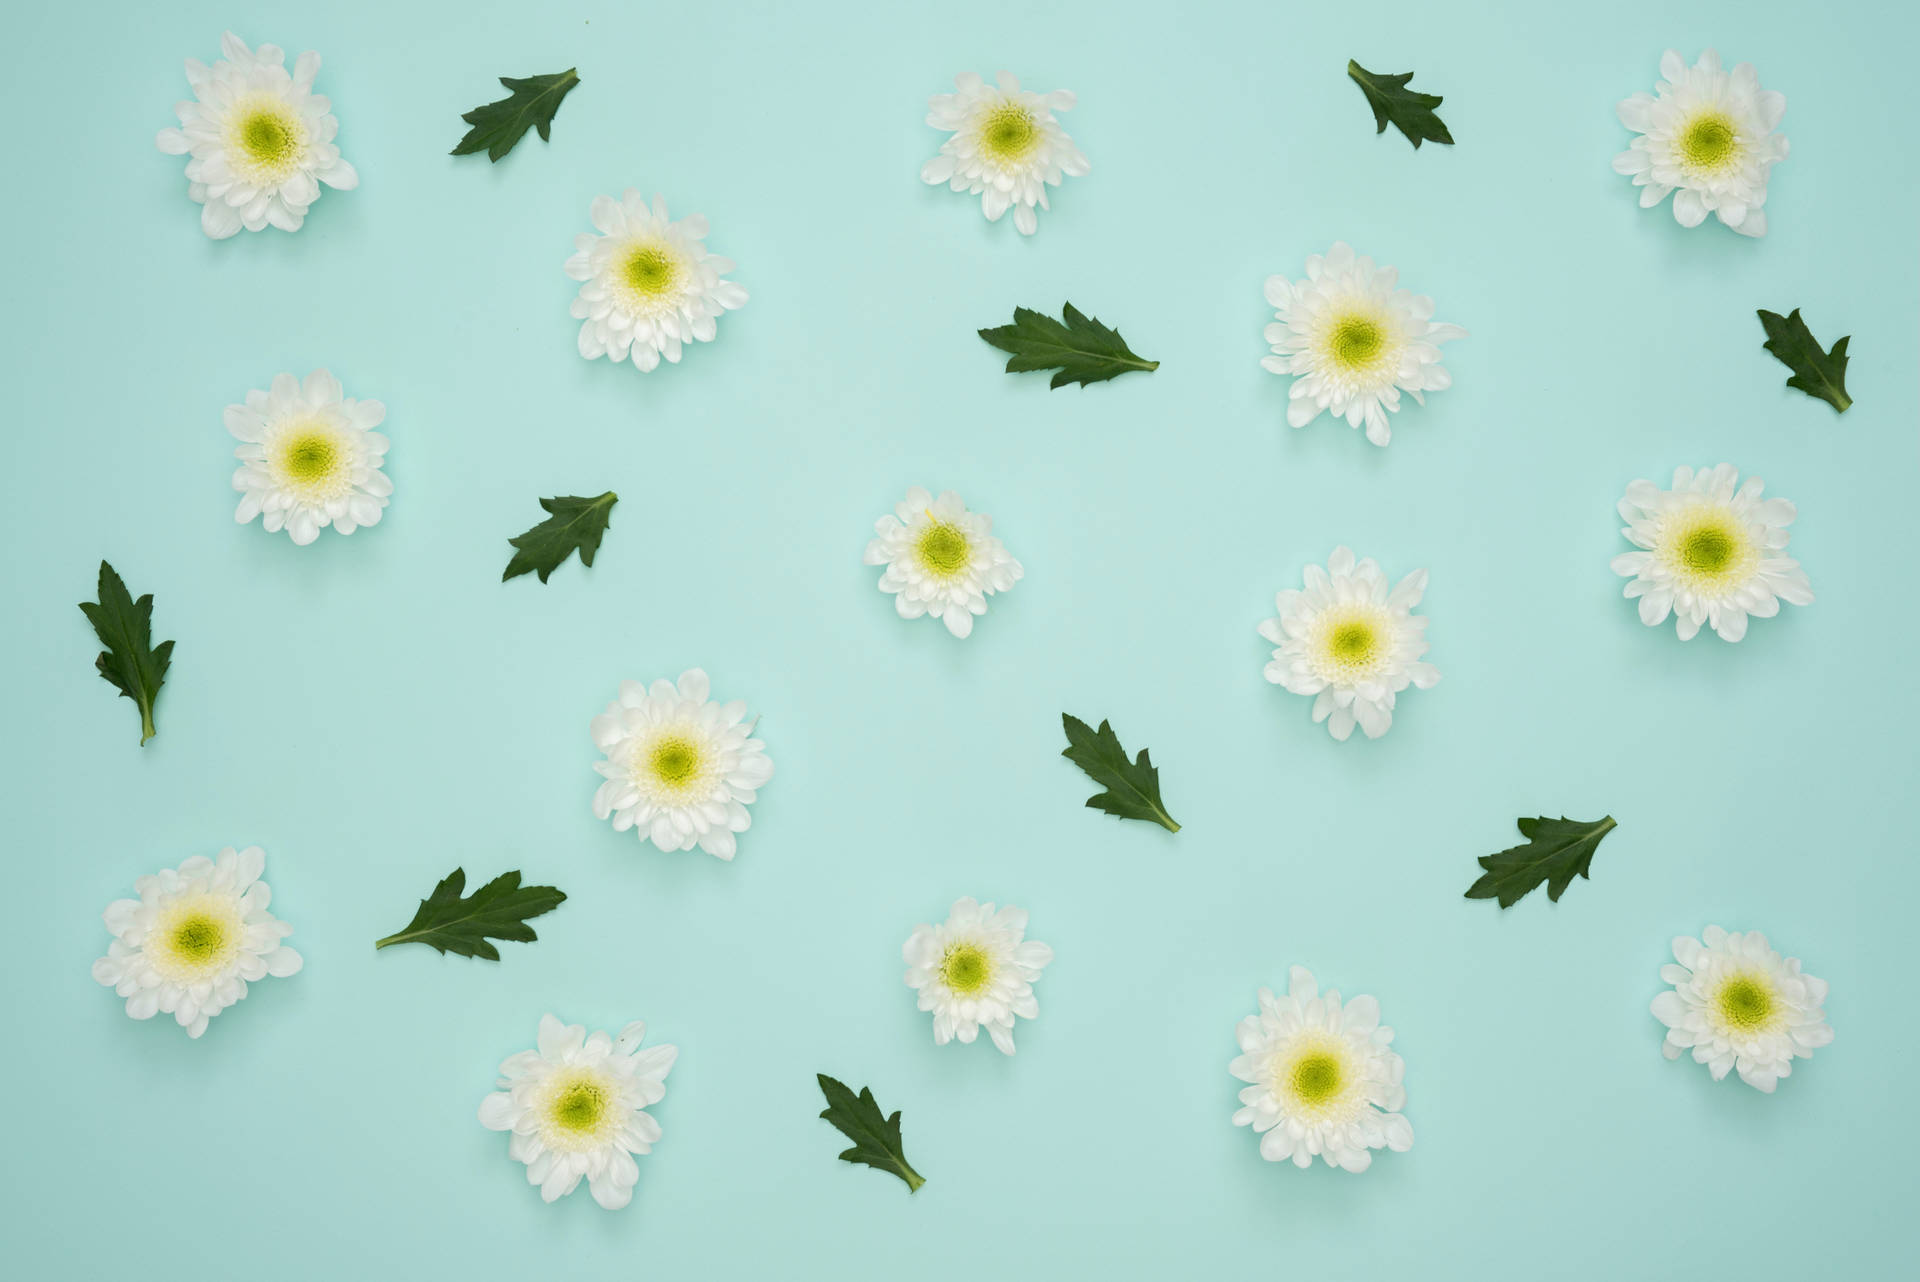 4k Tablet Mint Green Daisies Background